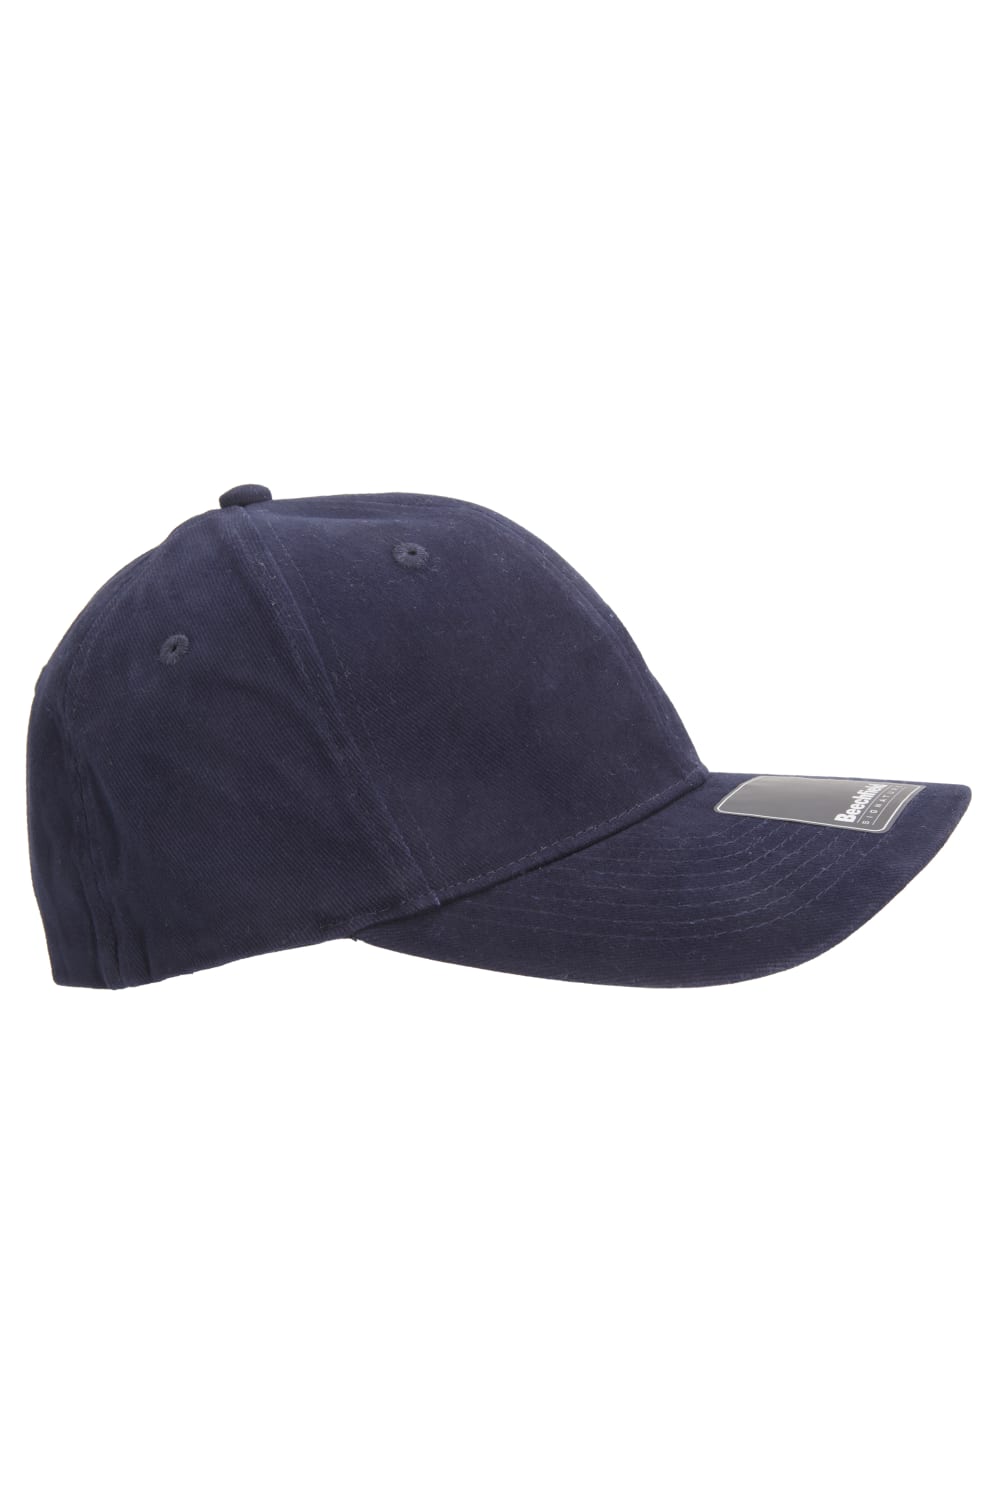 Adults Unisex Signature Stretch-Fit Baseball Cap - French Navy